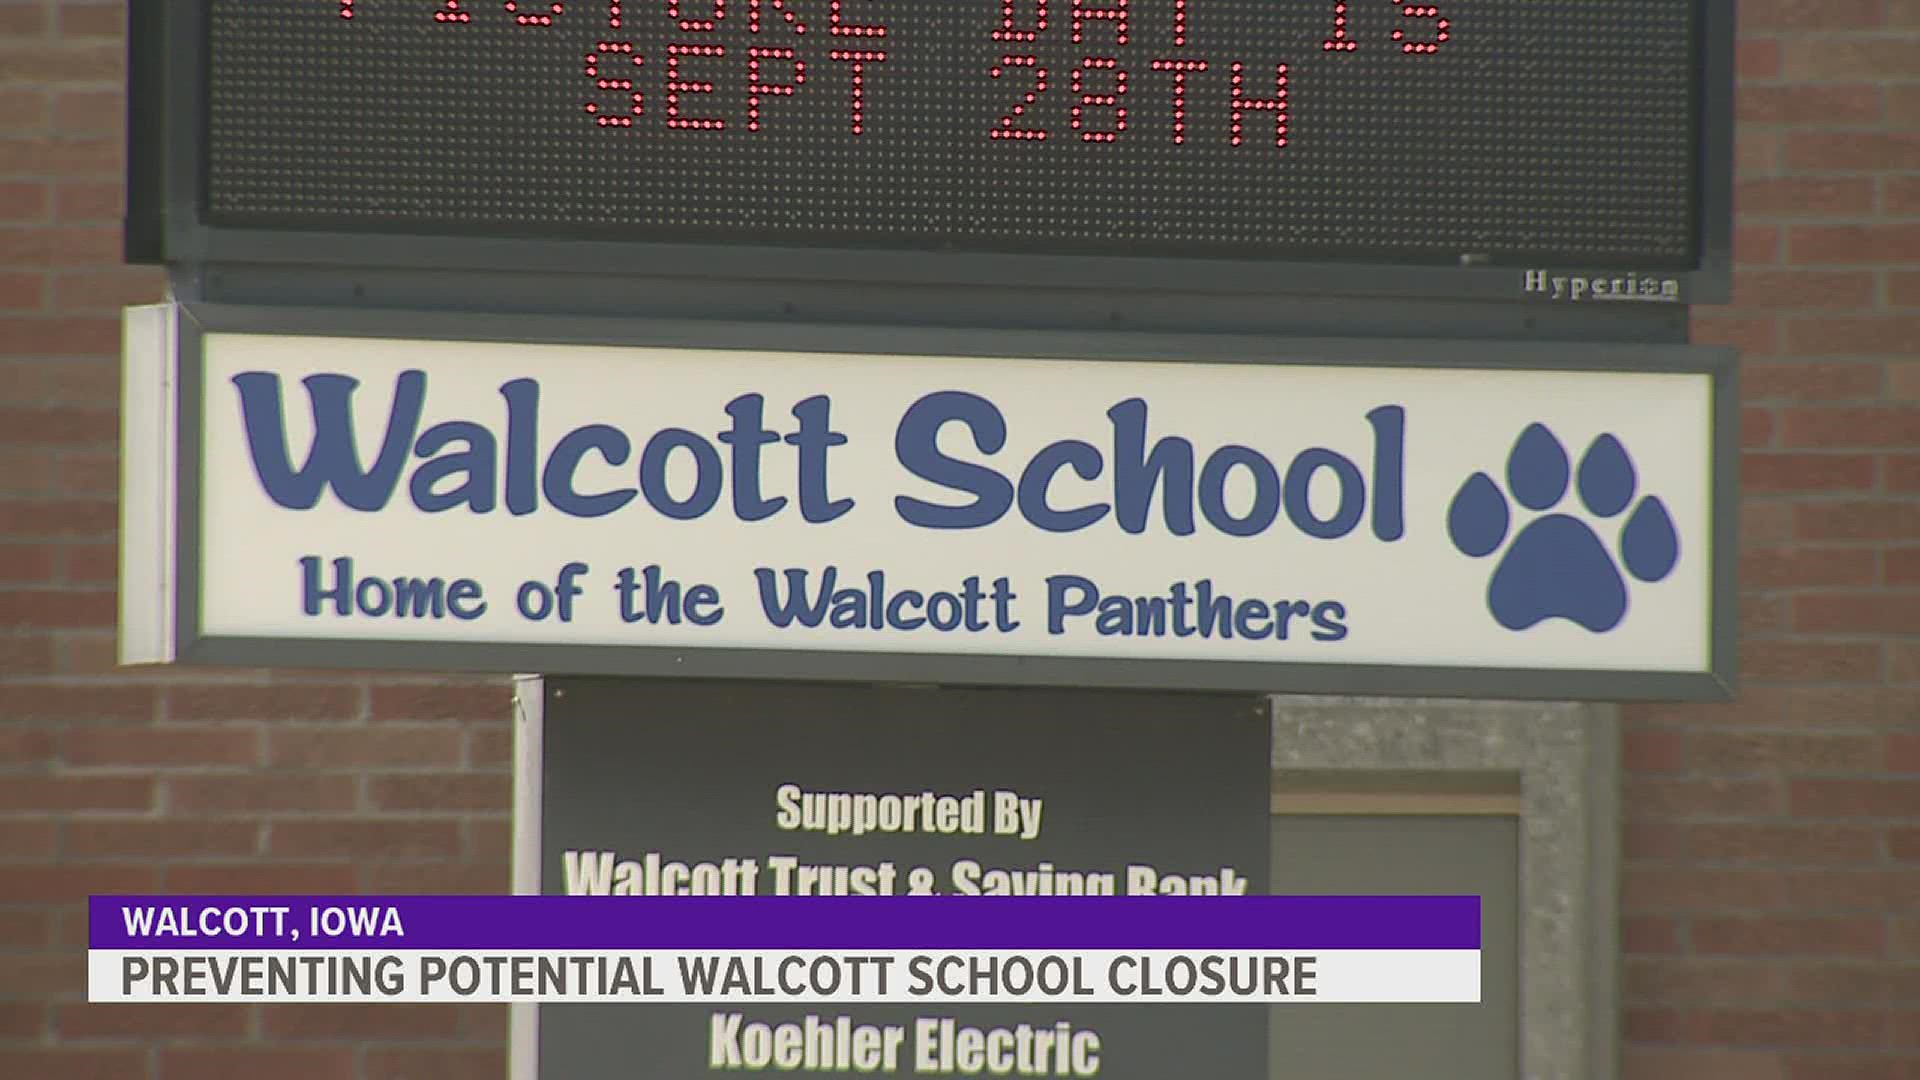 Davenport Community School District is considering closing Walcott Elementary and making it a Jr High School